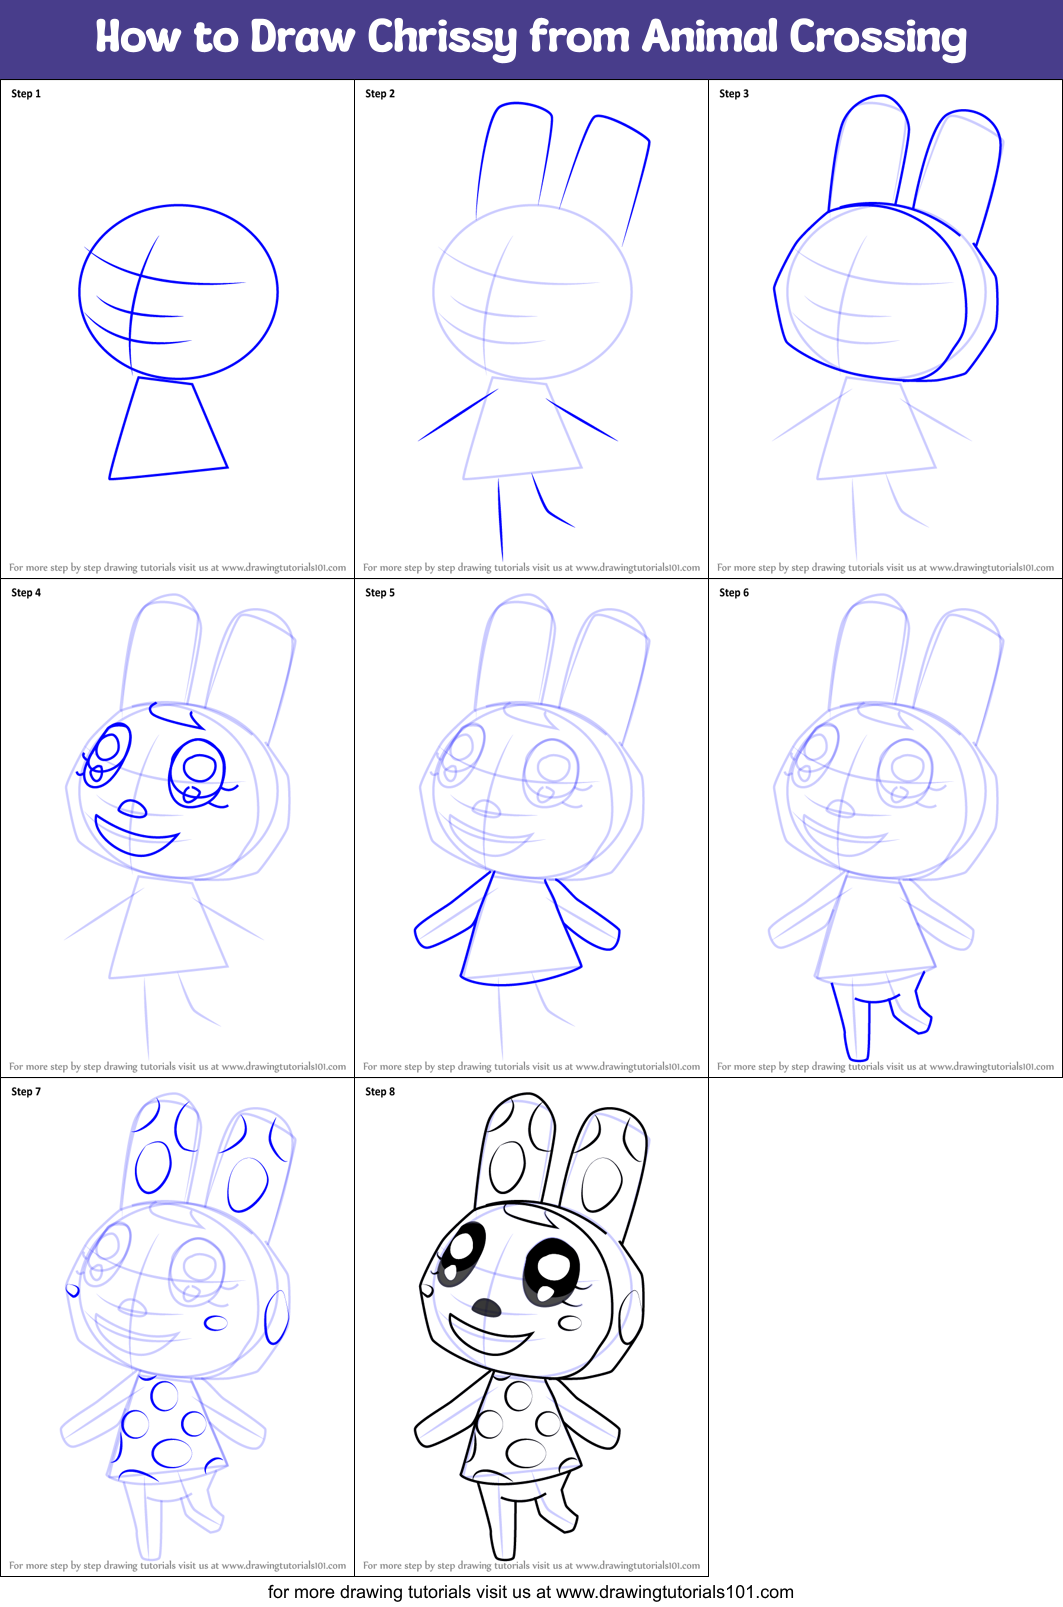 How to Draw Chrissy from Animal Crossing printable step by step drawing